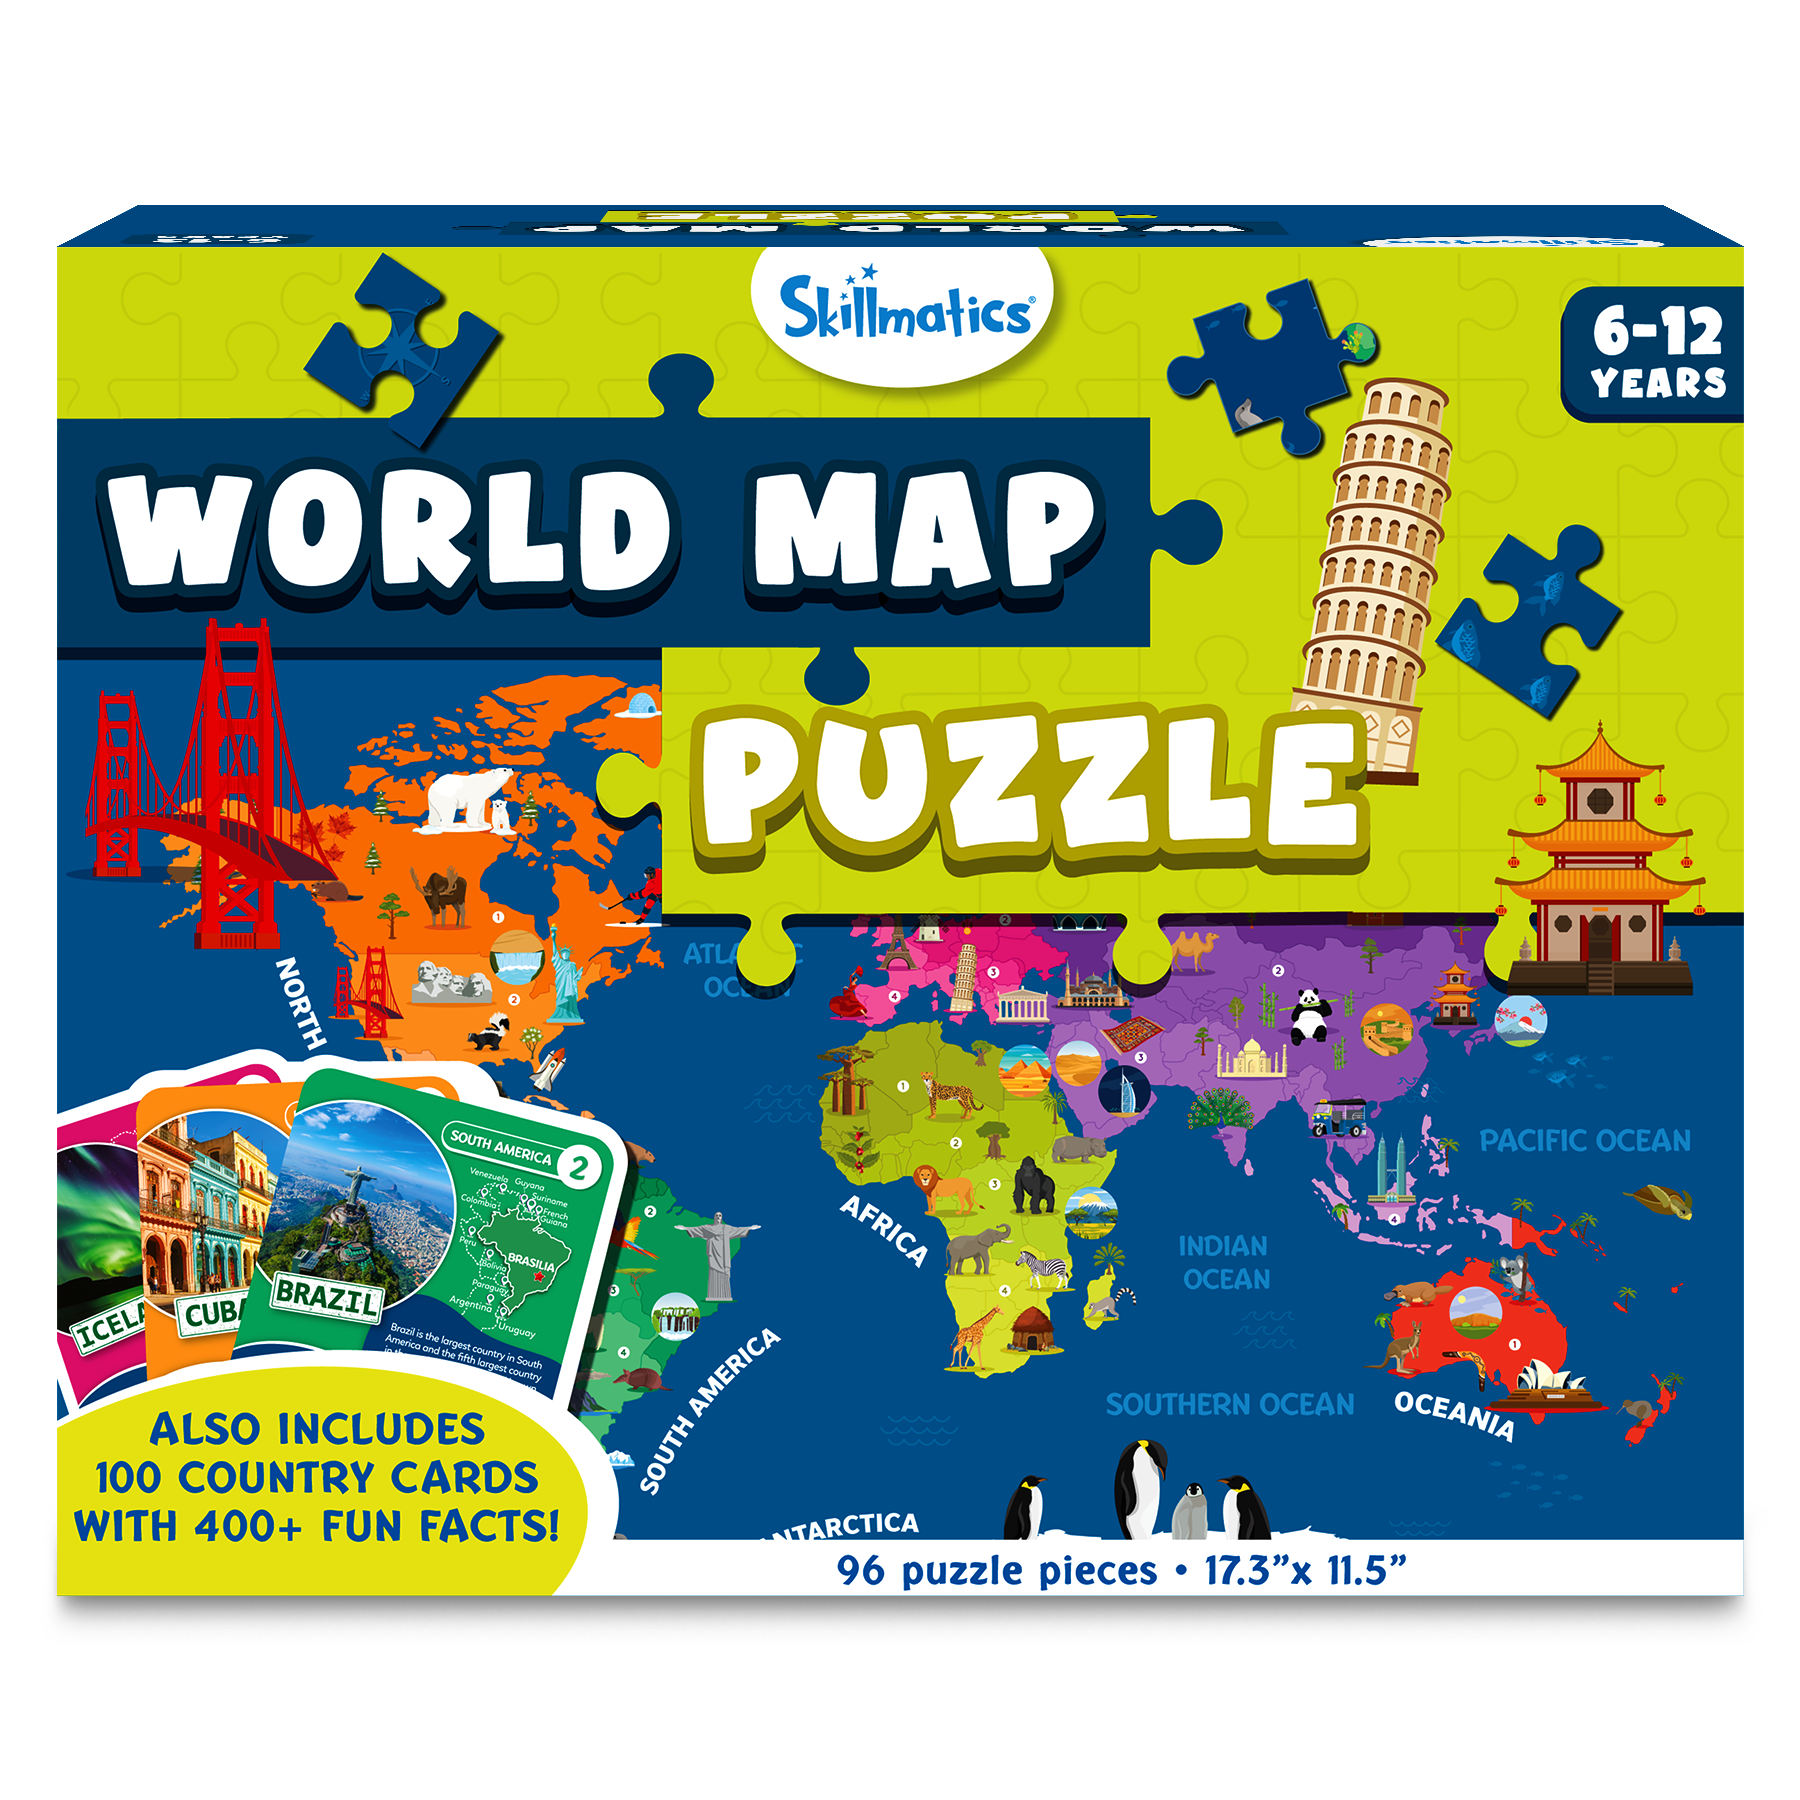 Skillmatics World Map Puzzle - 96 Piece Jigsaw Puzzle, Educational Toy For Learning 400+ Facts About 100 Countries, Gifts For Ages 6 To 12